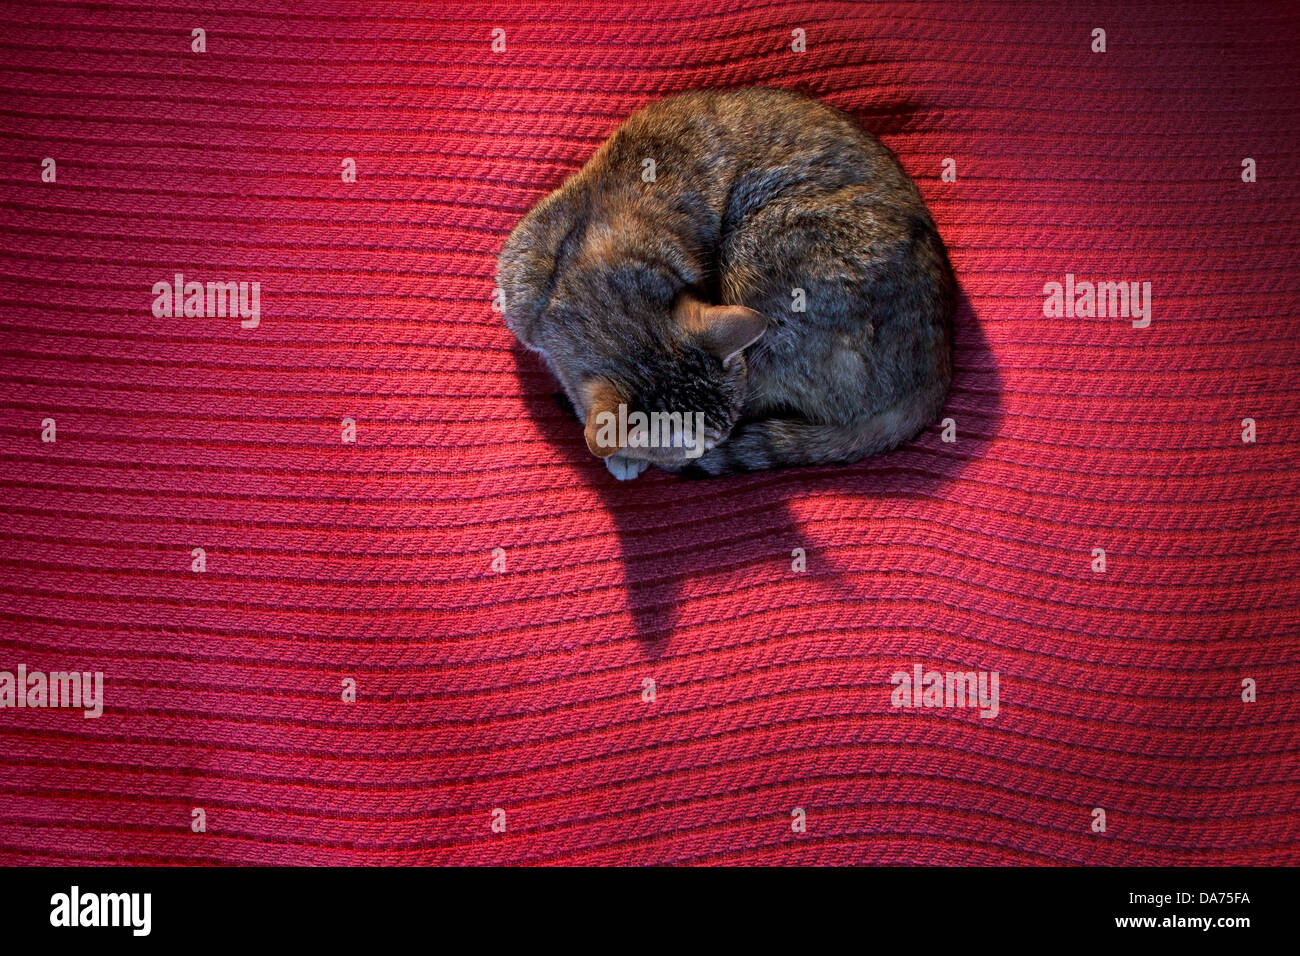 Cat on a Red Blanket Stock Photo